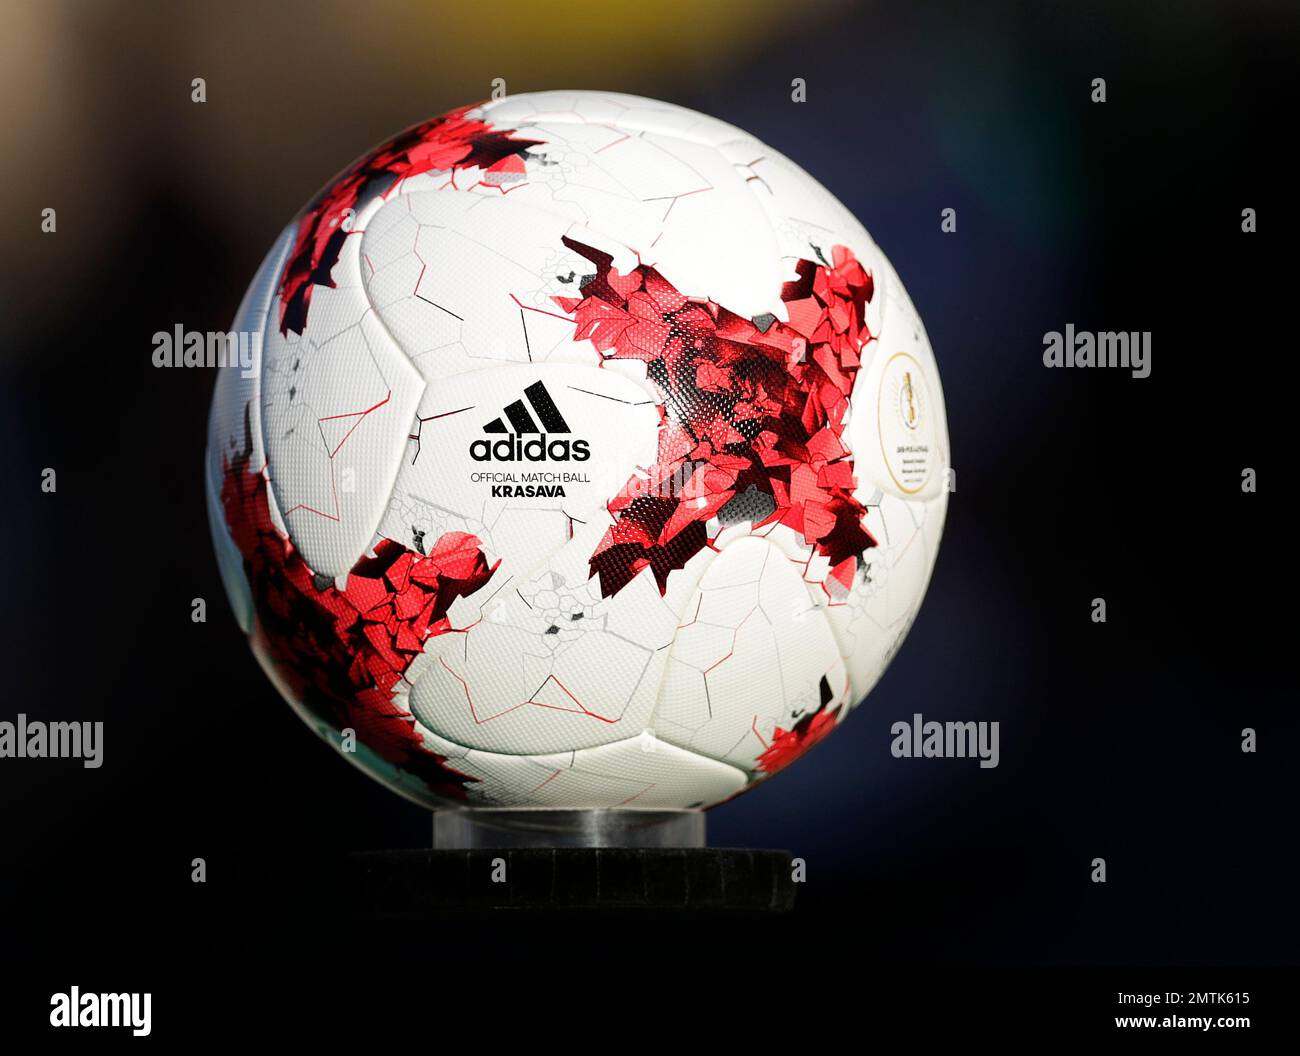 The new Adidas 'Krasava' soccer ball for the upcoming Confederations Cup in  Russia is displayed prior to the German soccer cup final match between  Borussia Dortmund and Eintracht Frankfurt in Berlin, Germany,